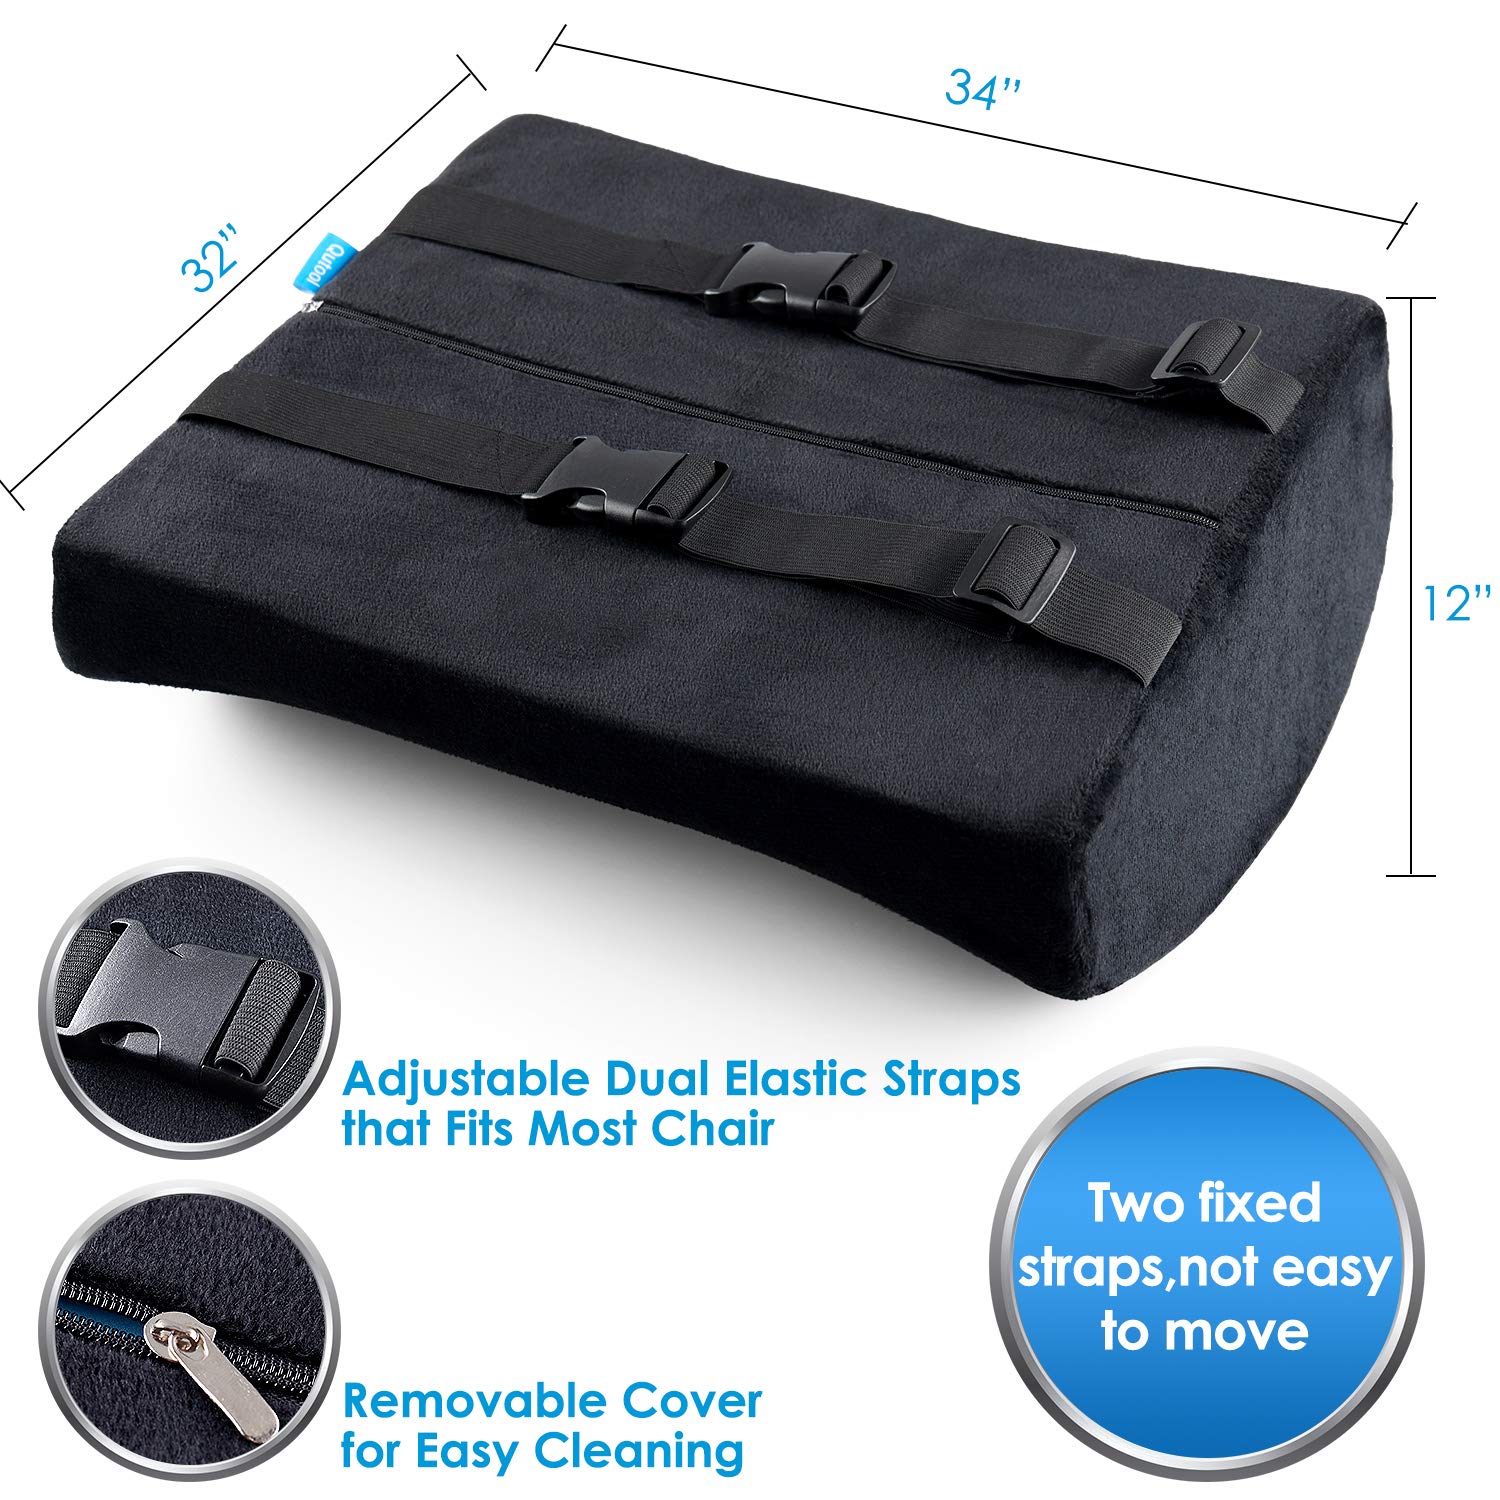 Black Mountain Products Orthopedic Memory Foam Seat Cushion and Lumbar Support K